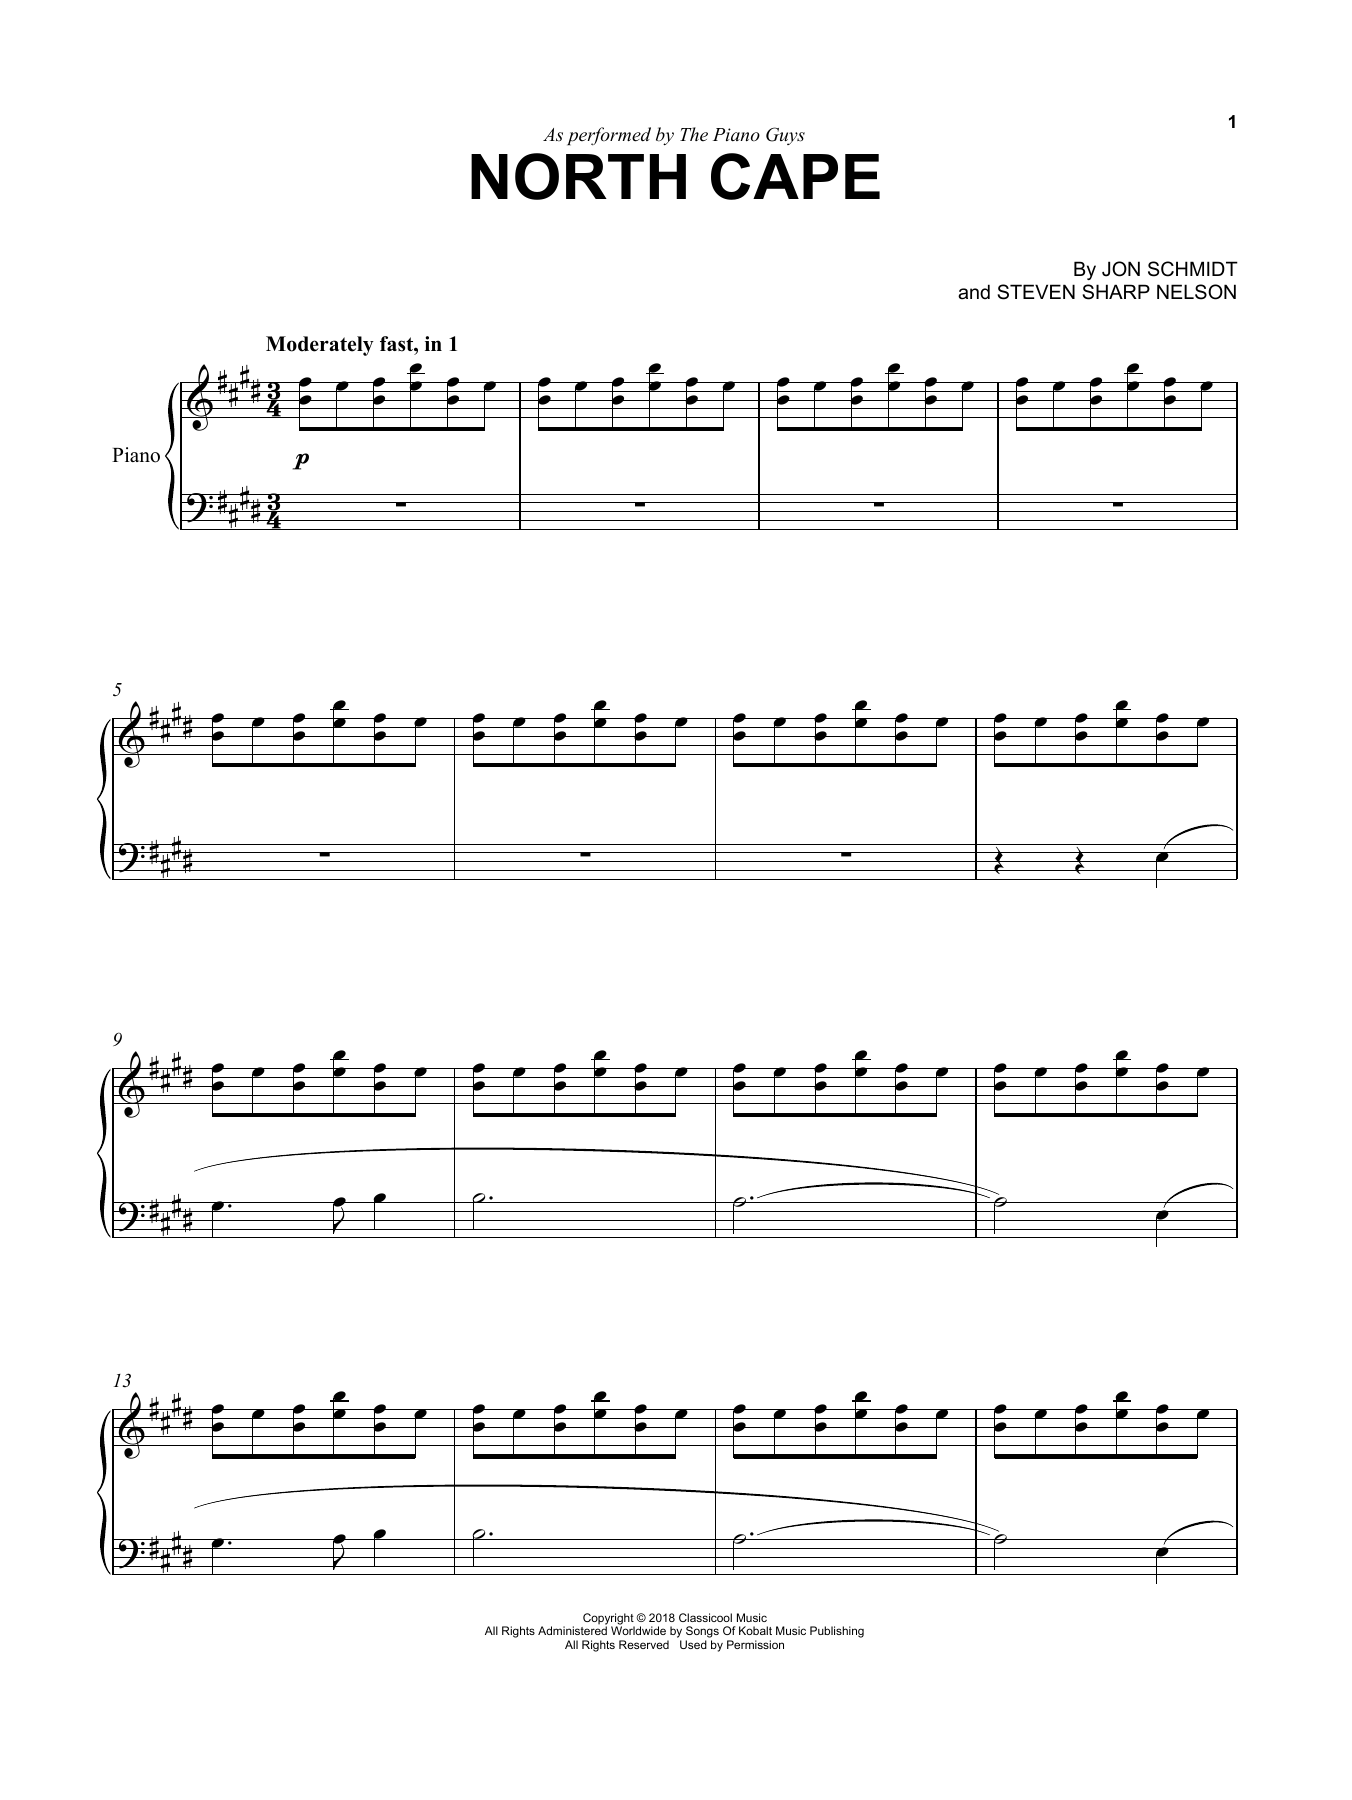 Download The Piano Guys North Cape Sheet Music